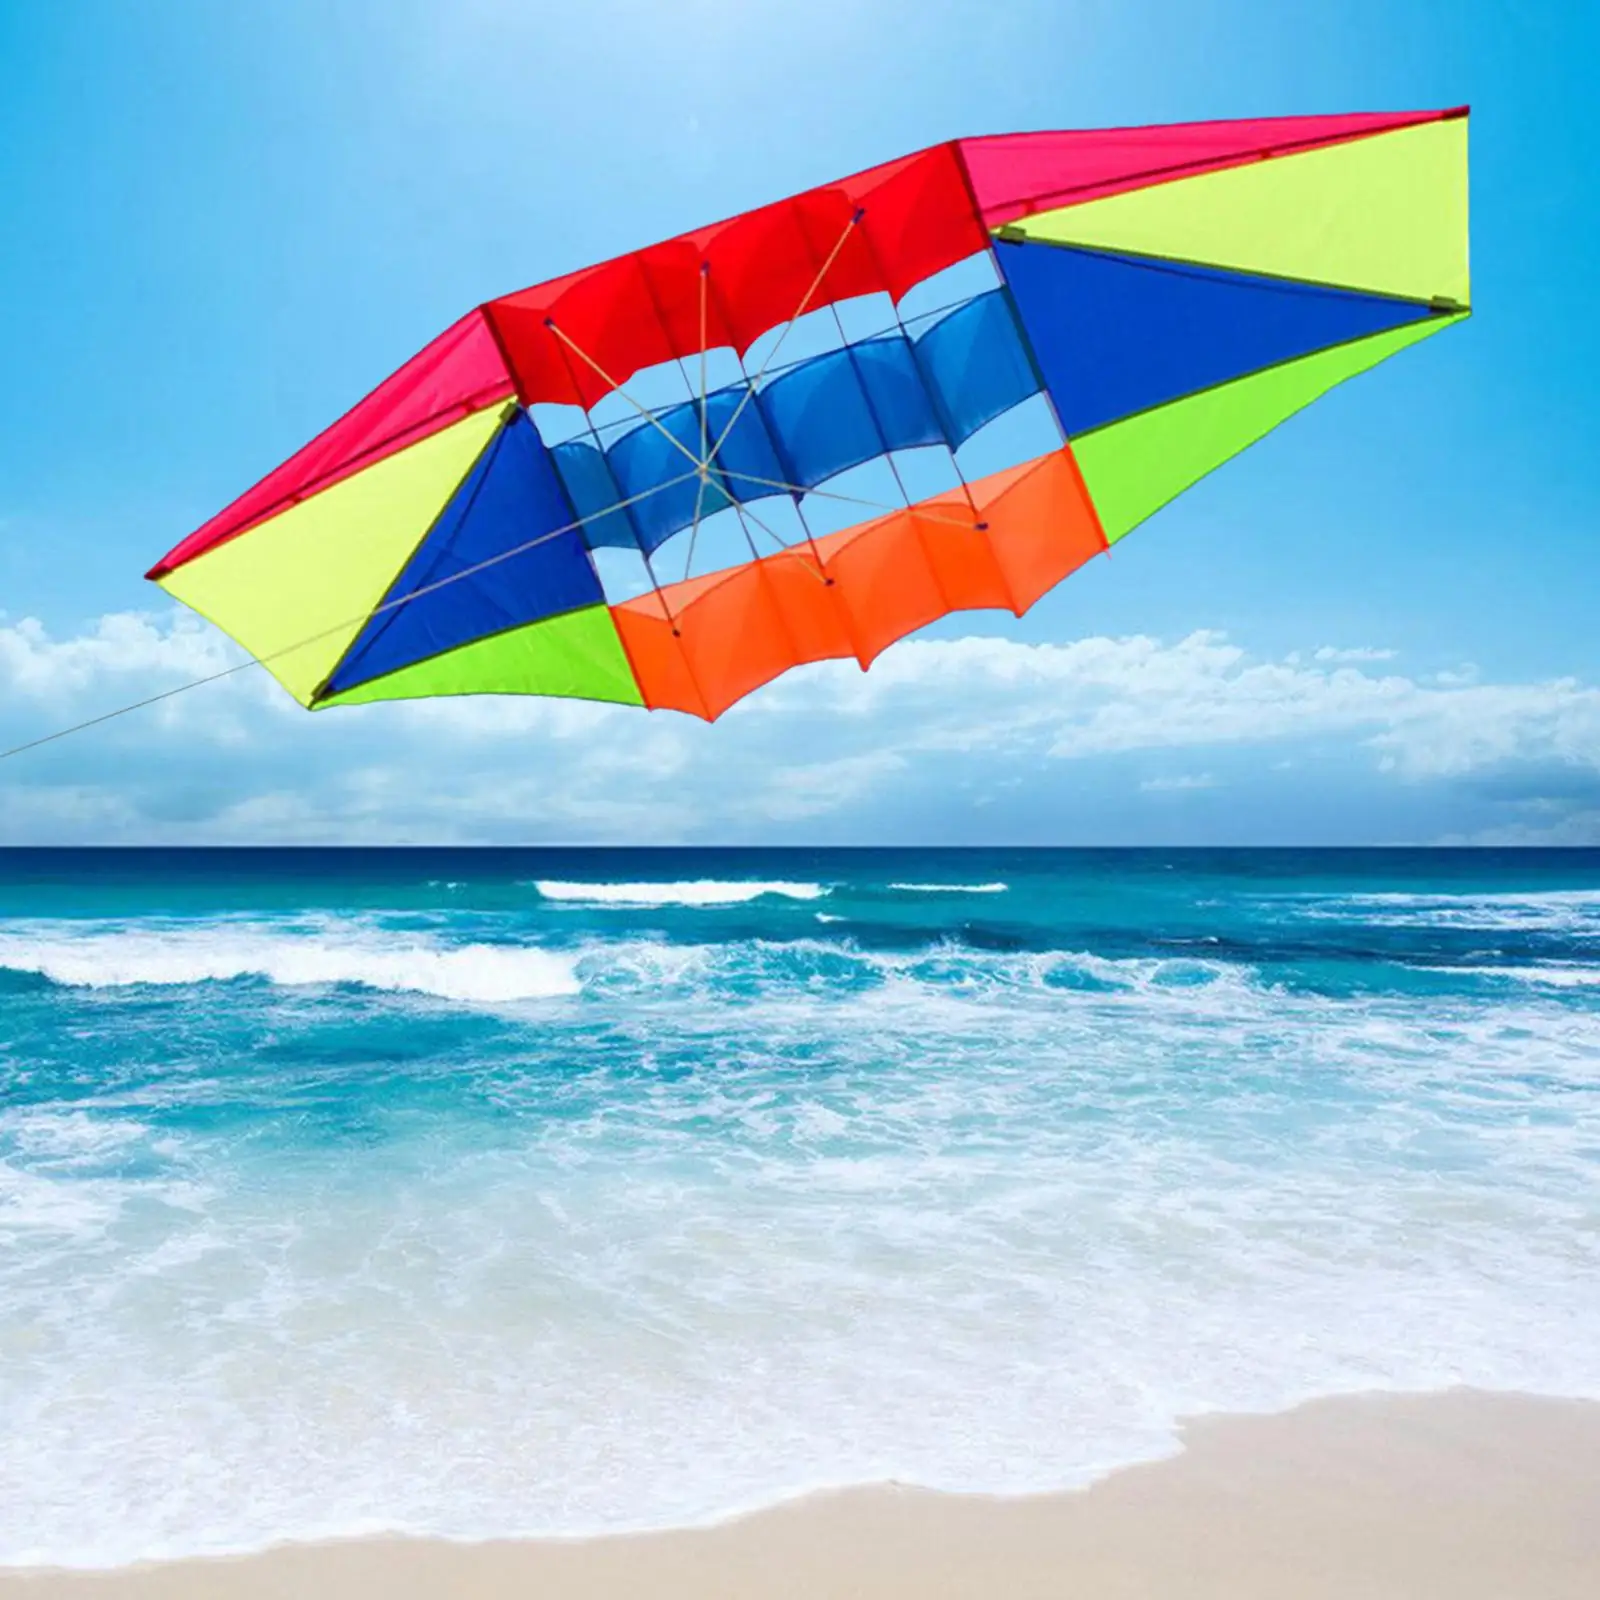 Large  Outdoor Sport Toys Easy to Fly Parachute Single Line s Surfing Beach s for Children Girls Boys